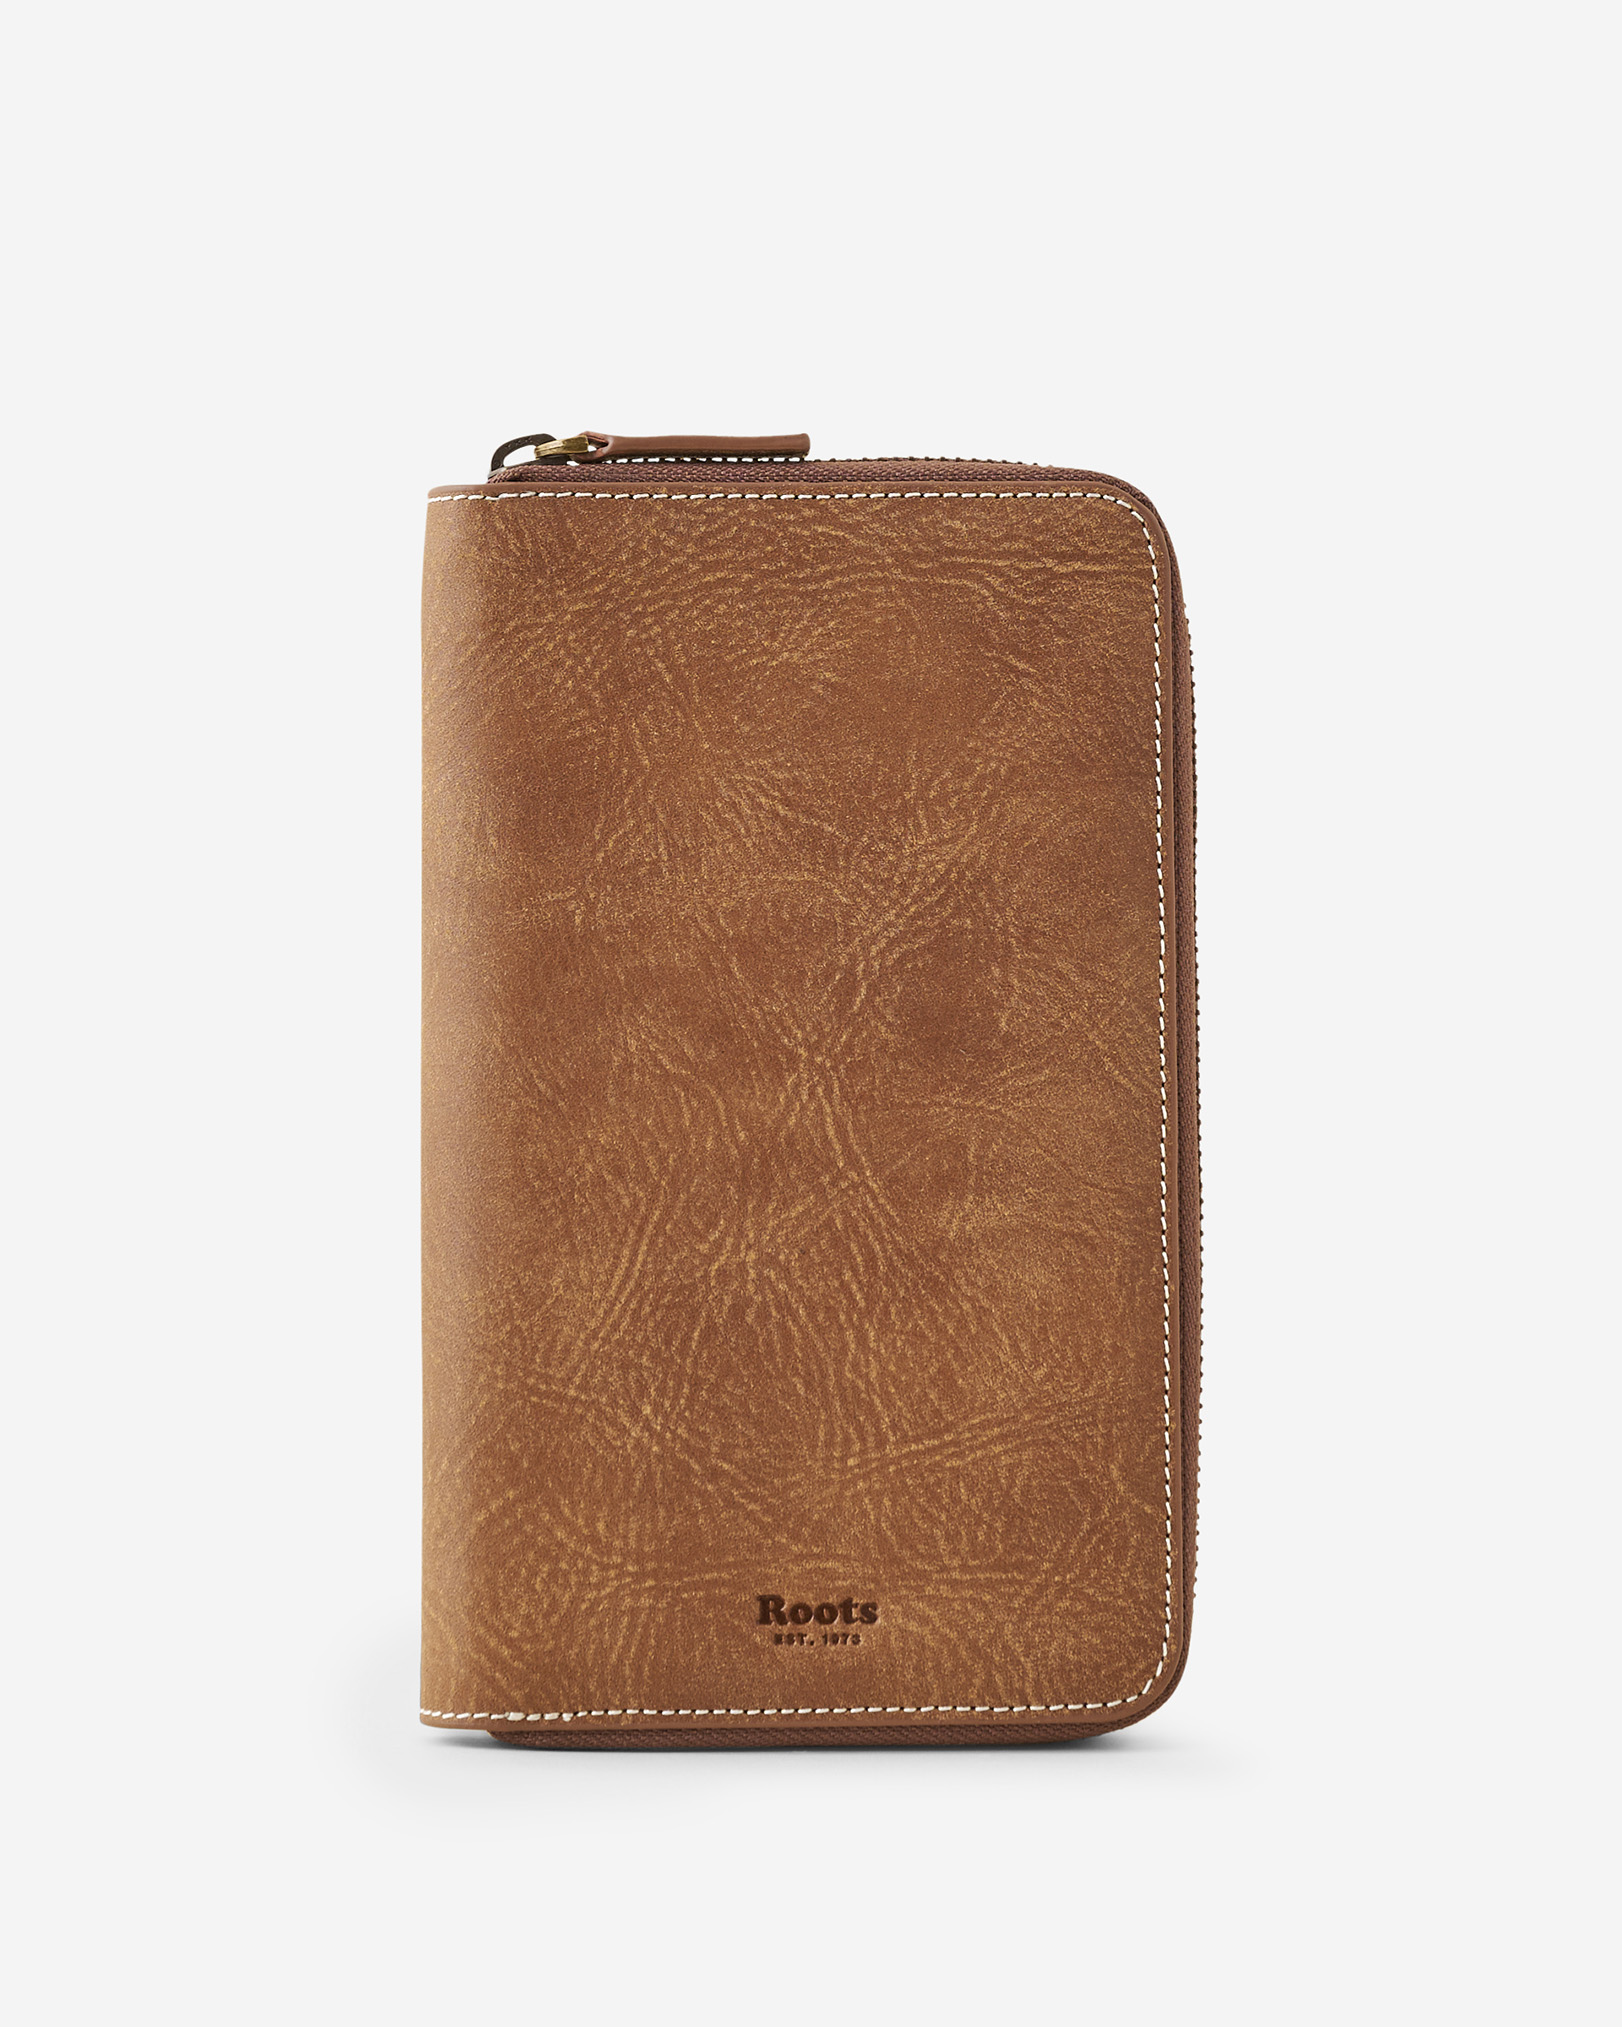 Roots Passport Wallet Tribe in Natural